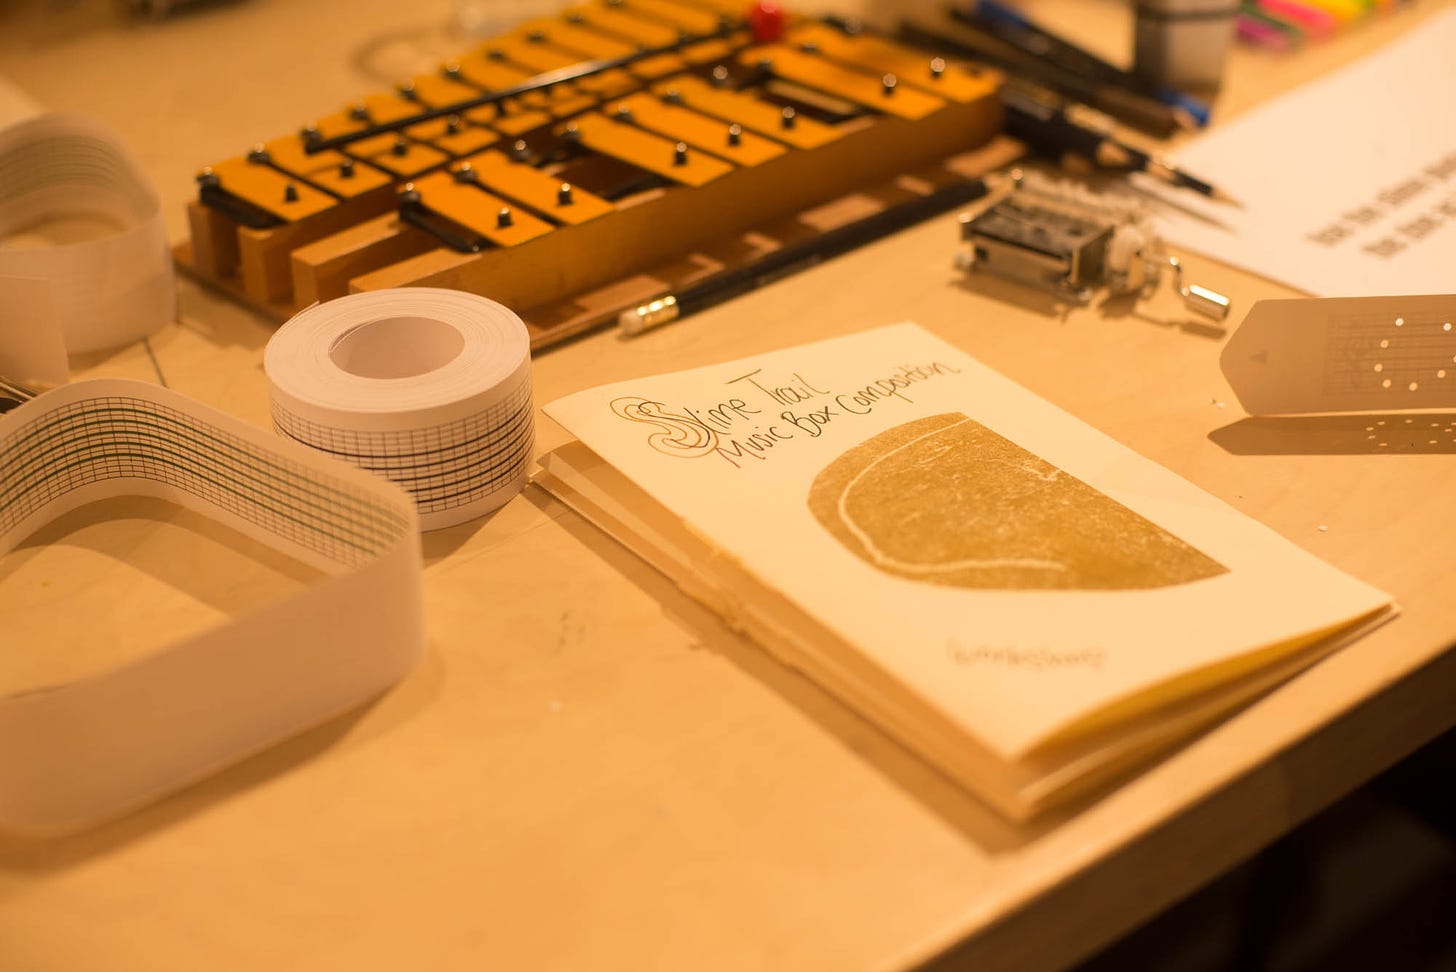 A table is filled with musical composition tools. There is a booklet titled "Slime Trail Music Box Composition," rolls of perforated music box paper, a hand-crank music box, a xylophone, and various pens and pencils, suggesting a workspace for creating music box compositions.